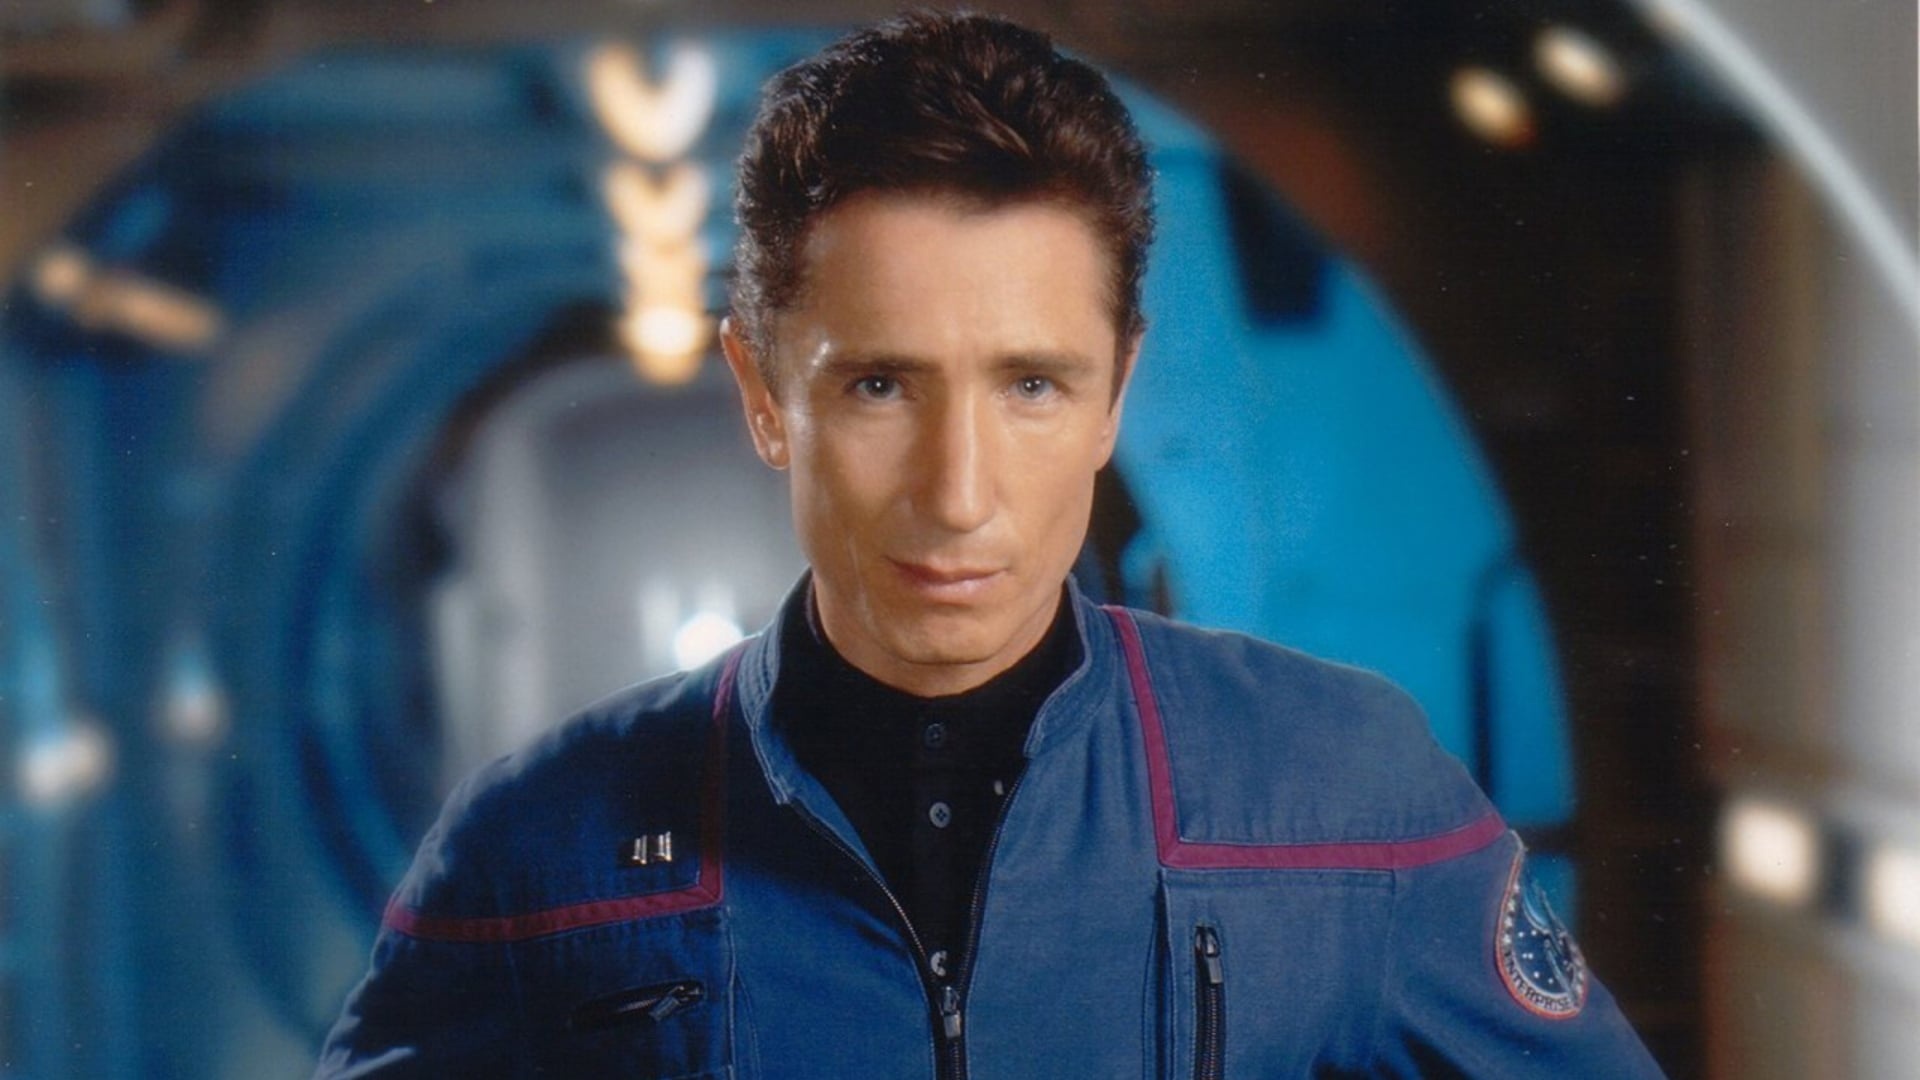 Enterprise (TV Series): Malcolm Reed, Dominic Keating, A British television, film and theater actor. 1920x1080 Full HD Wallpaper.